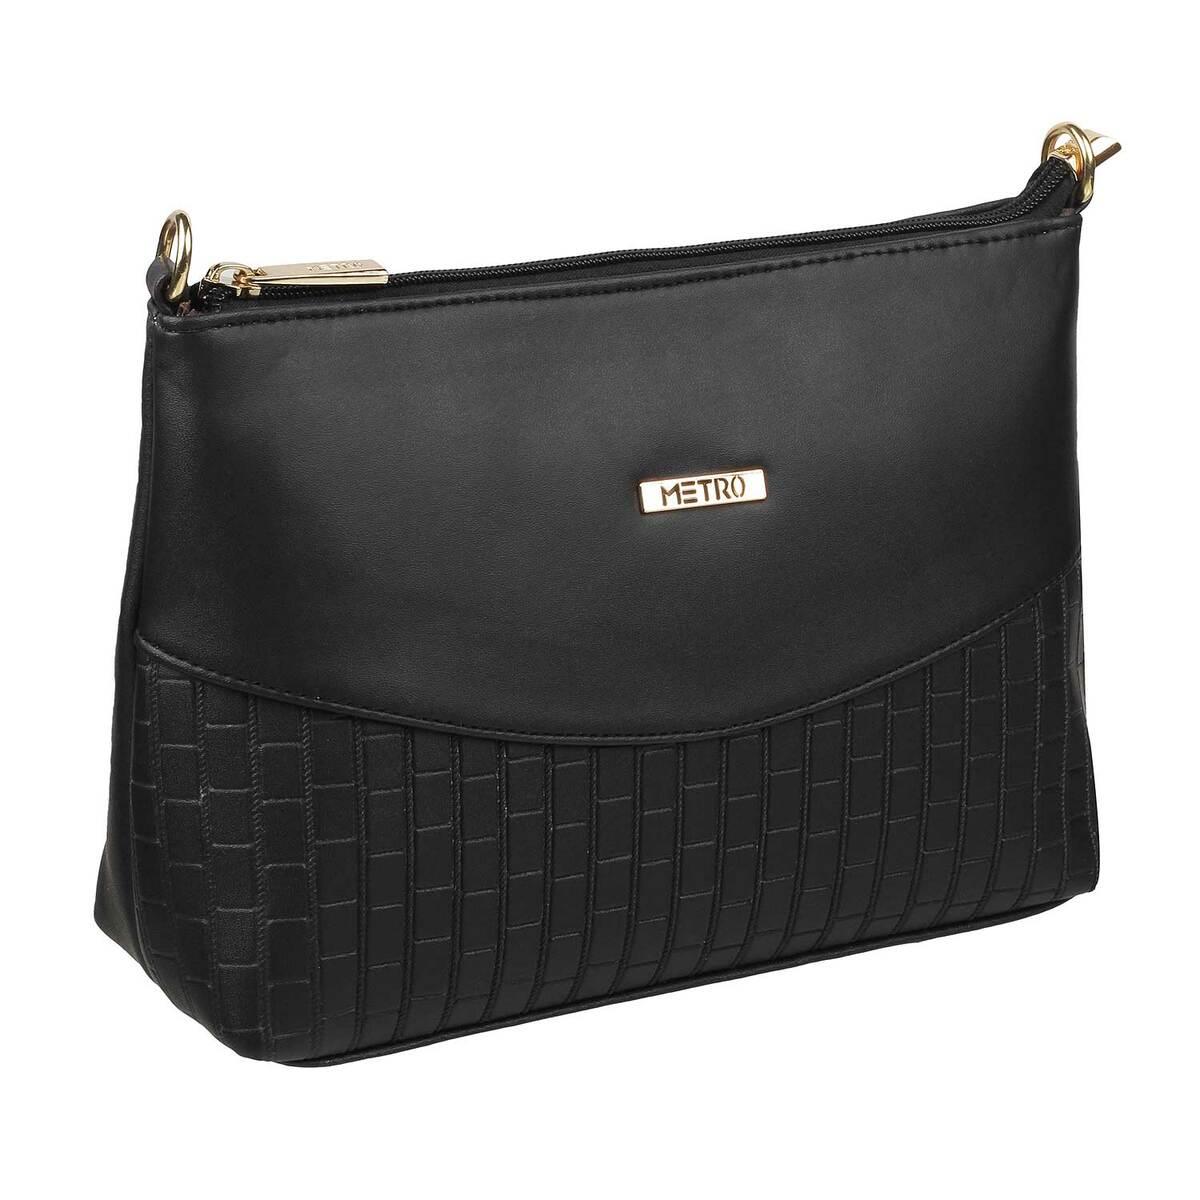 Fino Faux Leather Flap Over Snap Purse – Houterasies